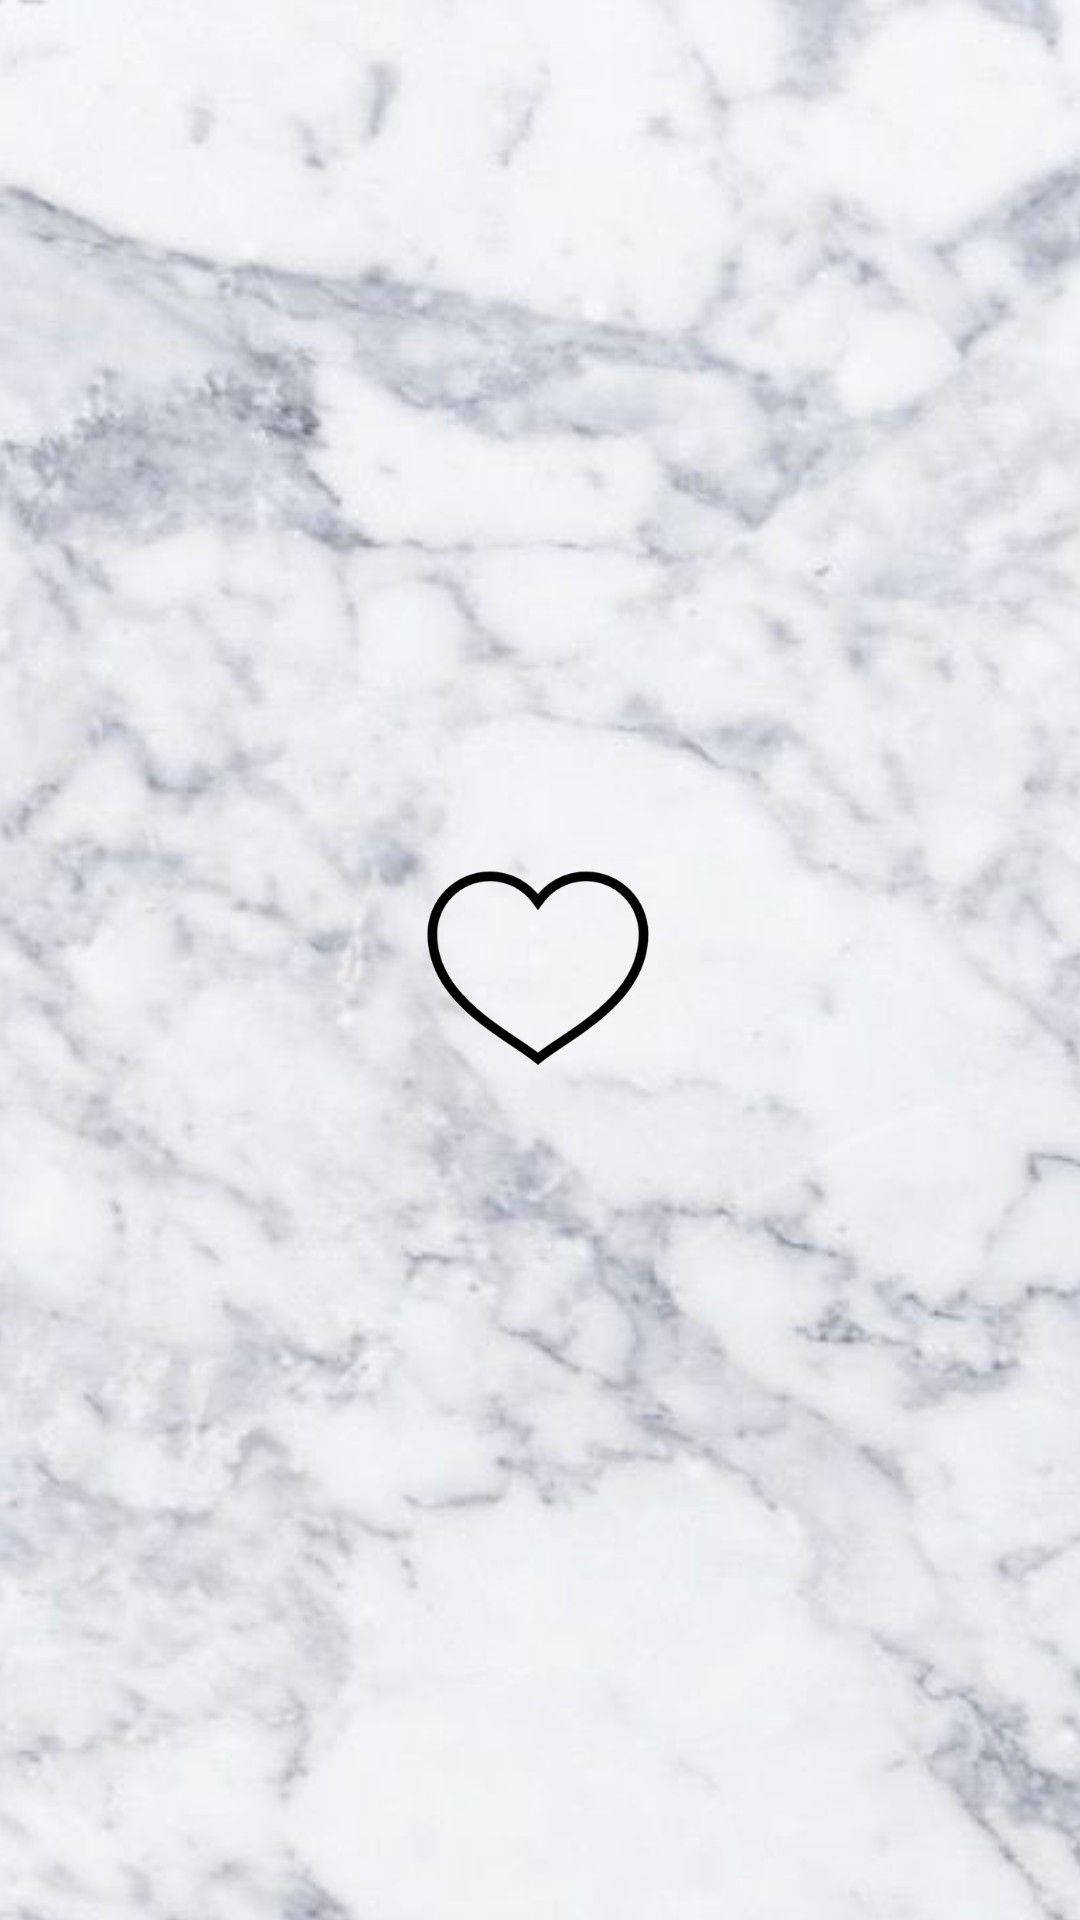 Stylish Hollow Heart Shape On Black And White Marble Iphone Background Wallpaper